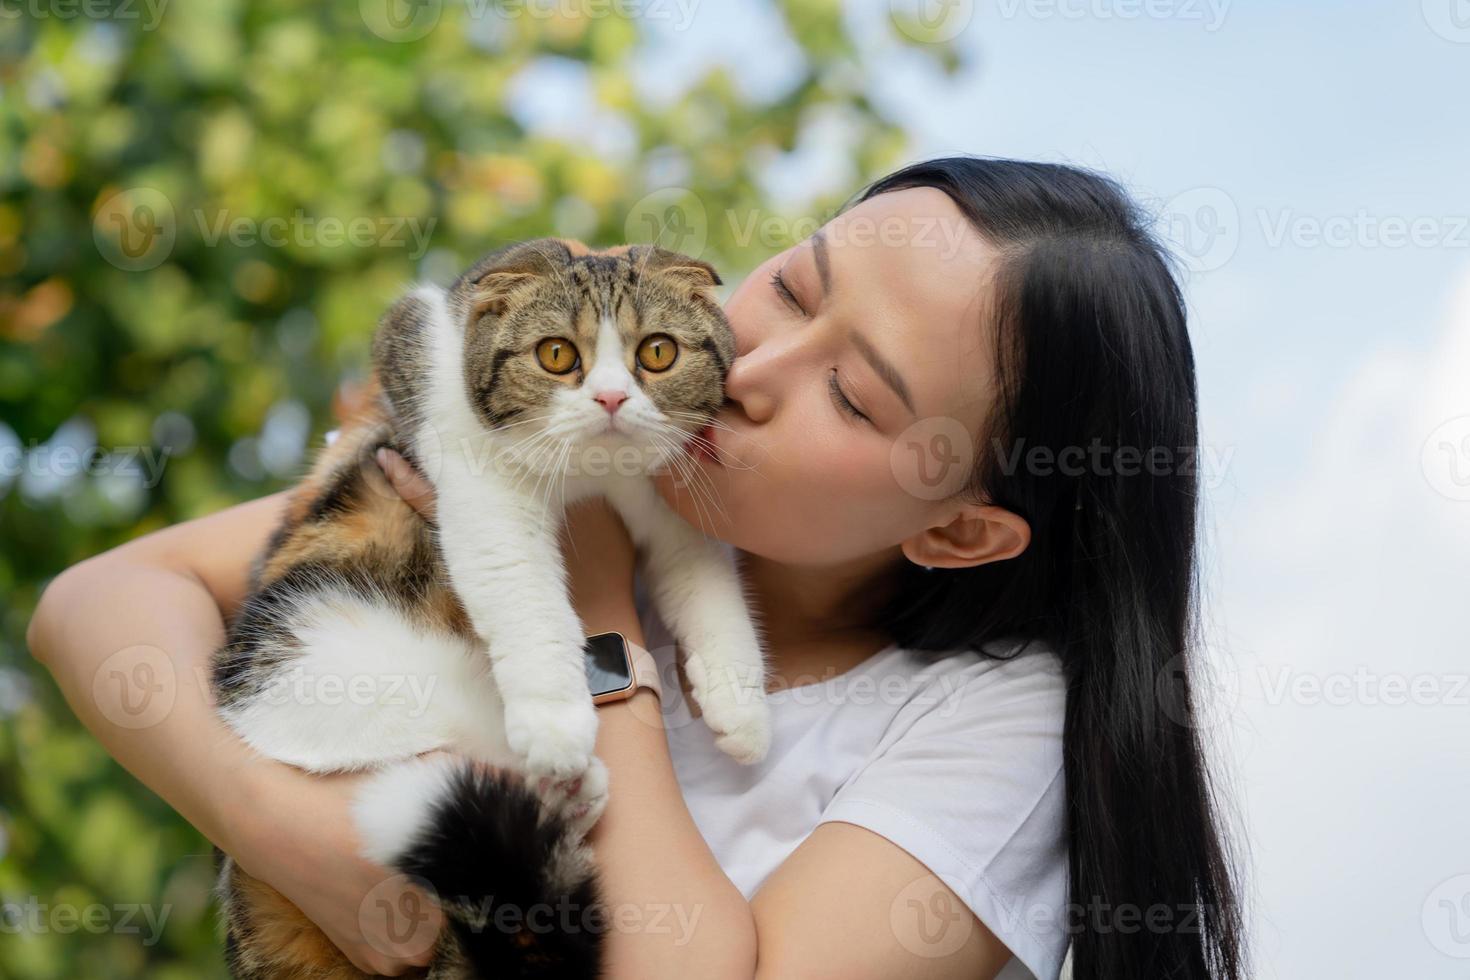 Beautiful young girl holds a Scottish cat with orange eyes, outdoor, close-up photo